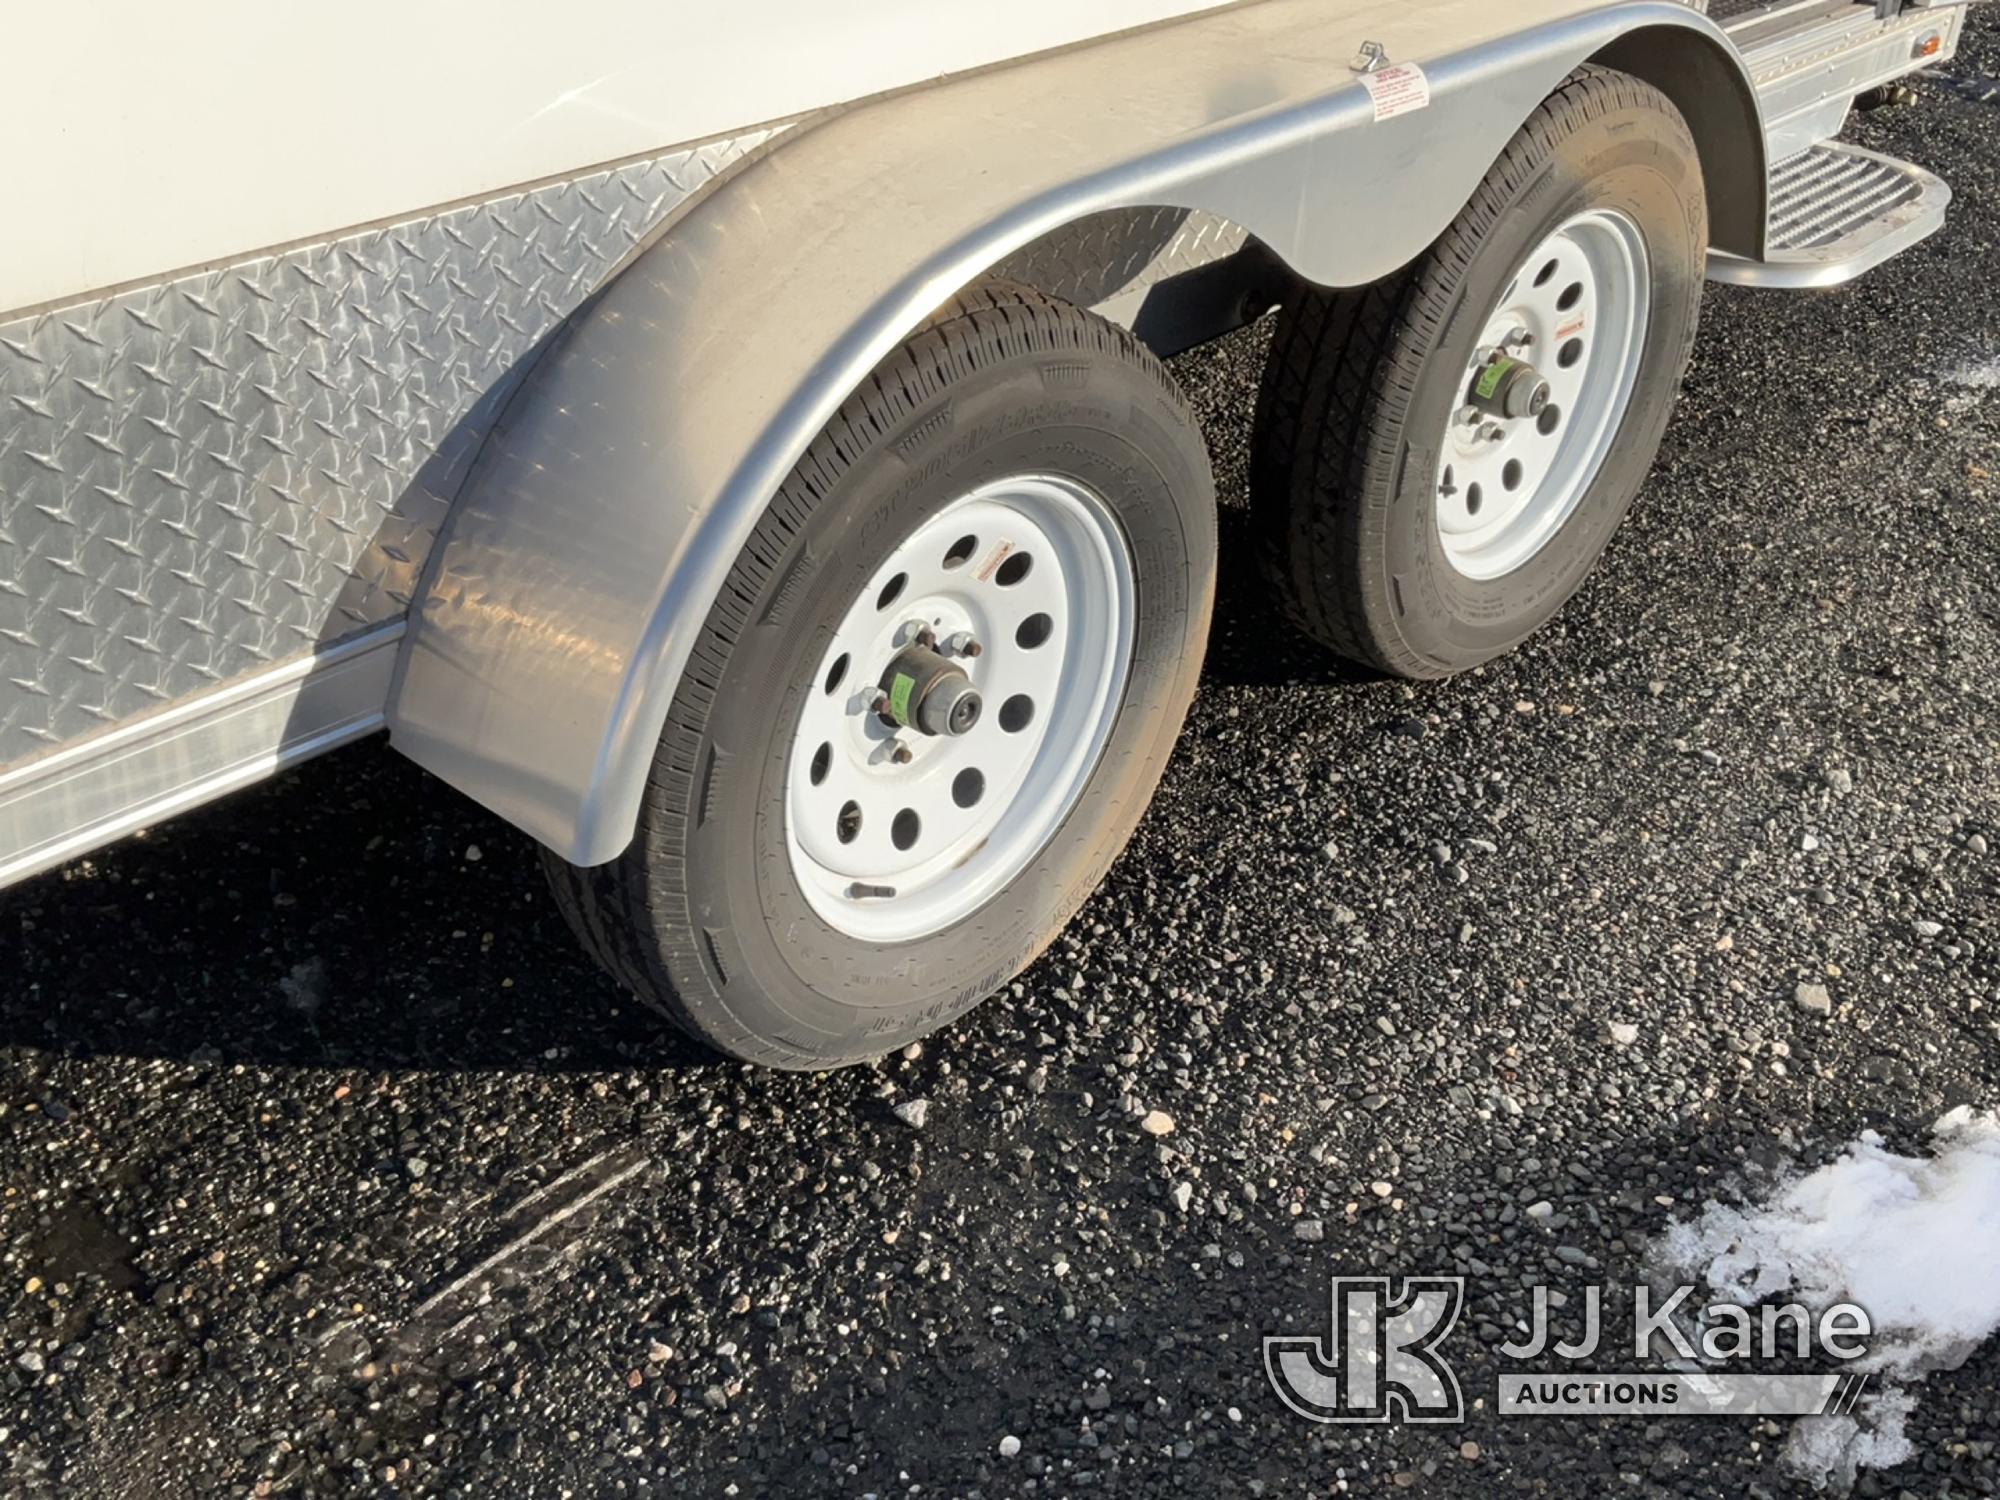 (Kings Park, NY) 2022 Intech FOST-7X12-TA Fiber Optic Splicing Trailer Inspection and Removal BY APP